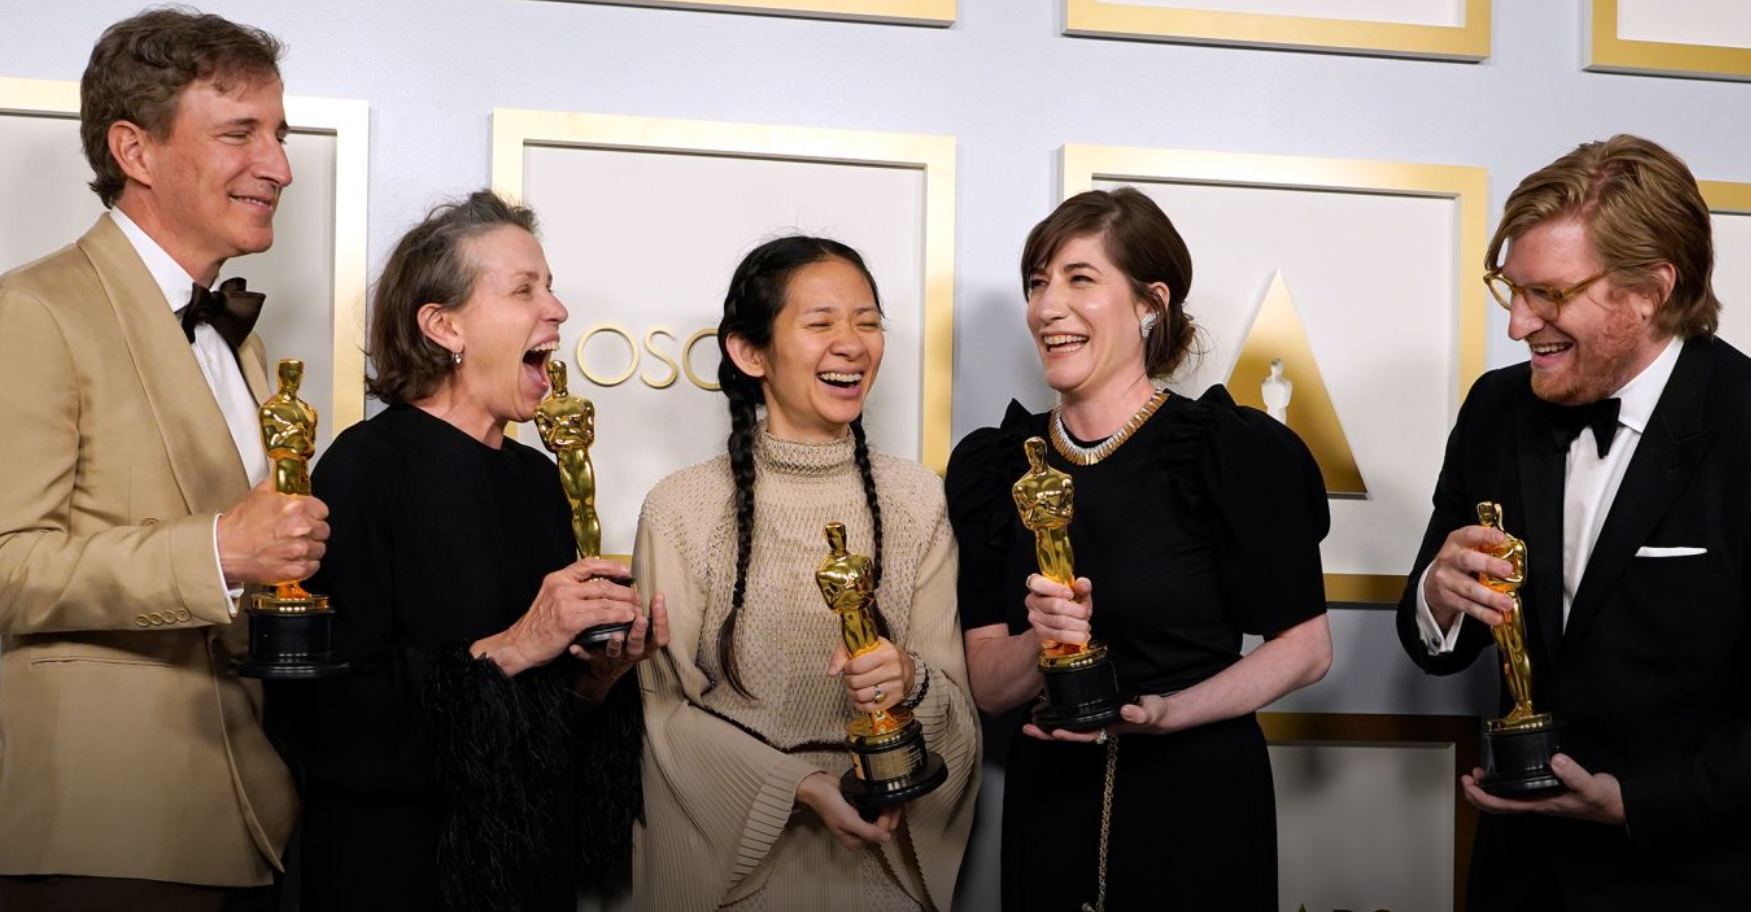 In pictures: The 2021 Academy Awards